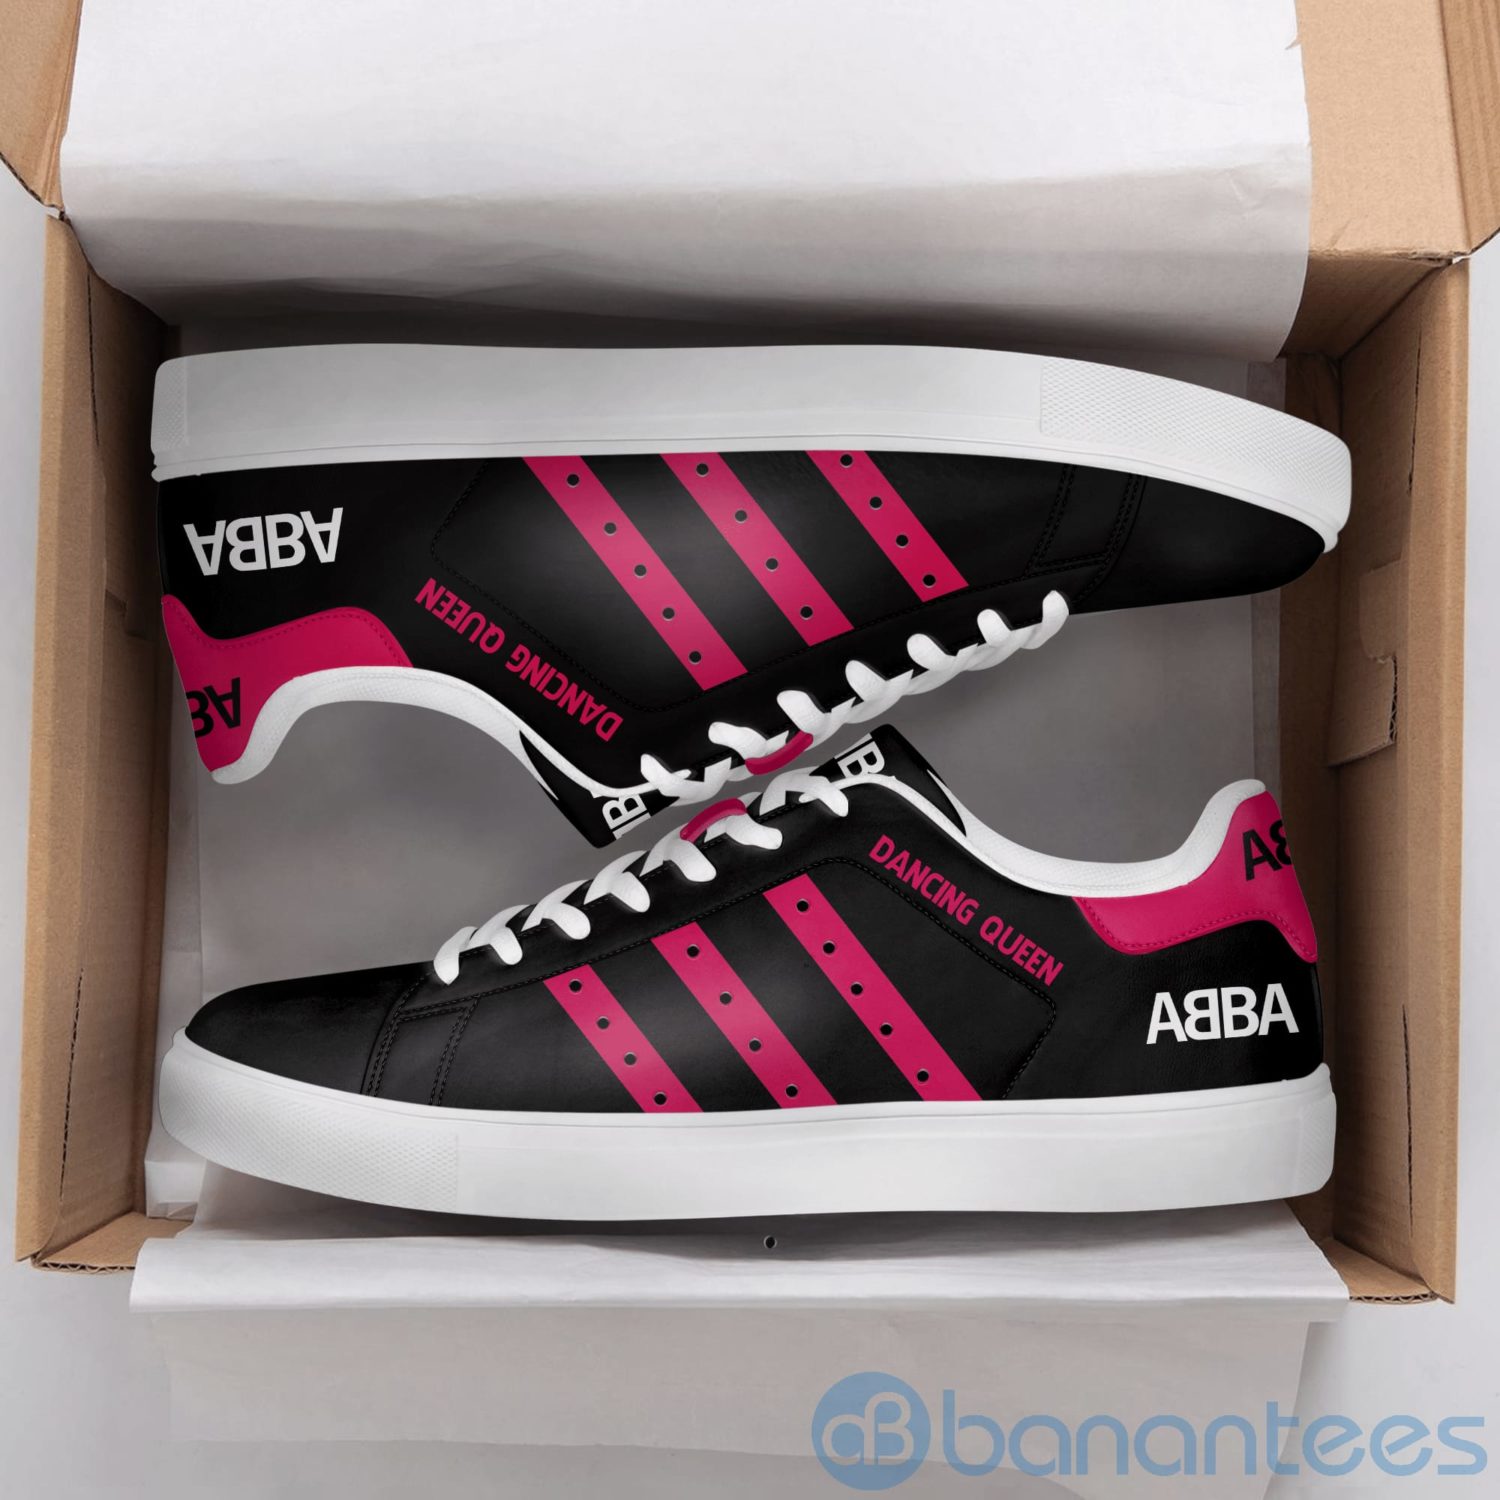 Abba Dancing Queen Pink Striped Low Top Skate Shoes